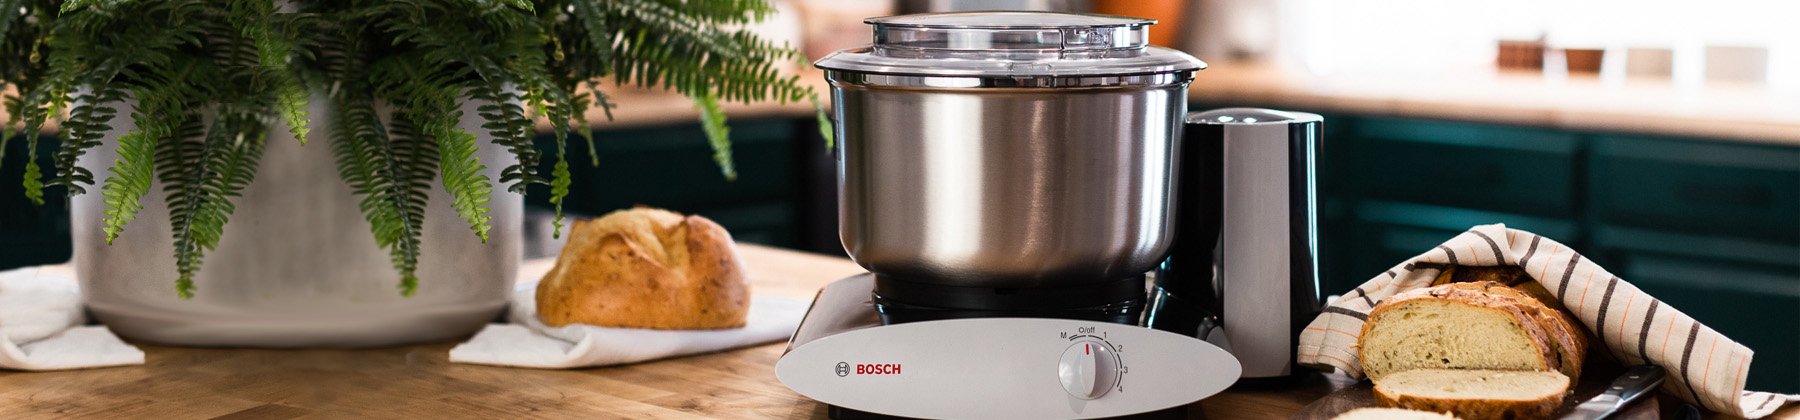 Bosch Universal Mixer 700W With Attachments Made in Germany for